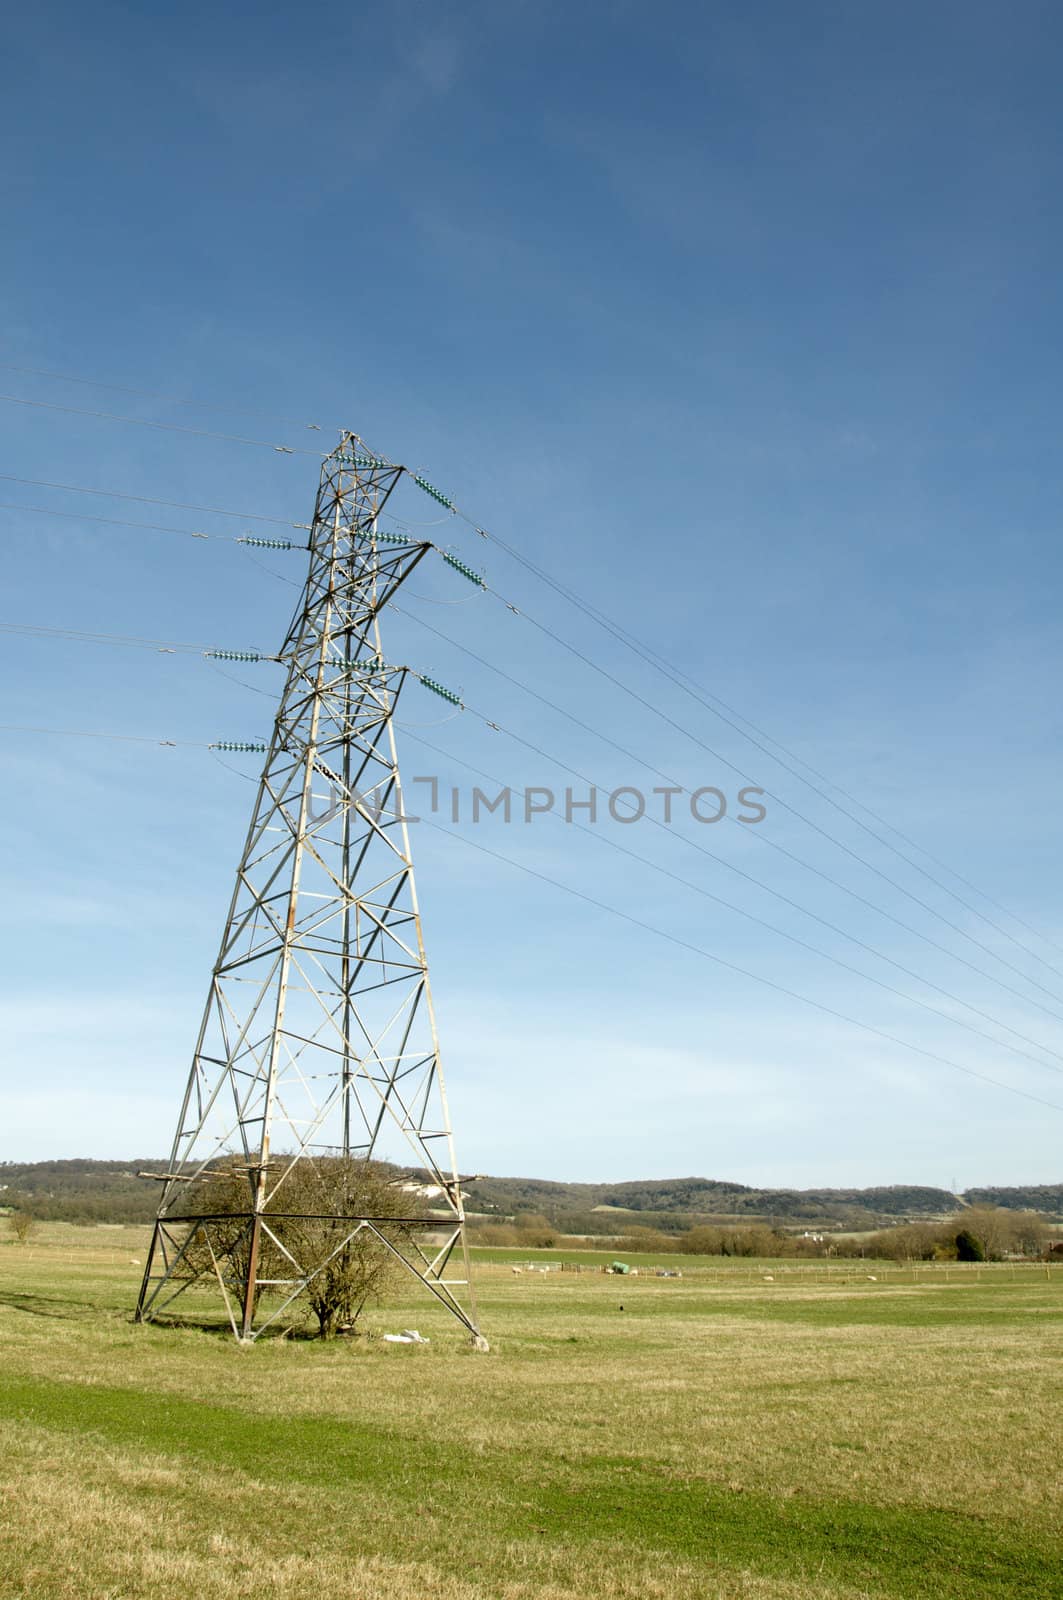 An electrical pylon in a field with a blue sky